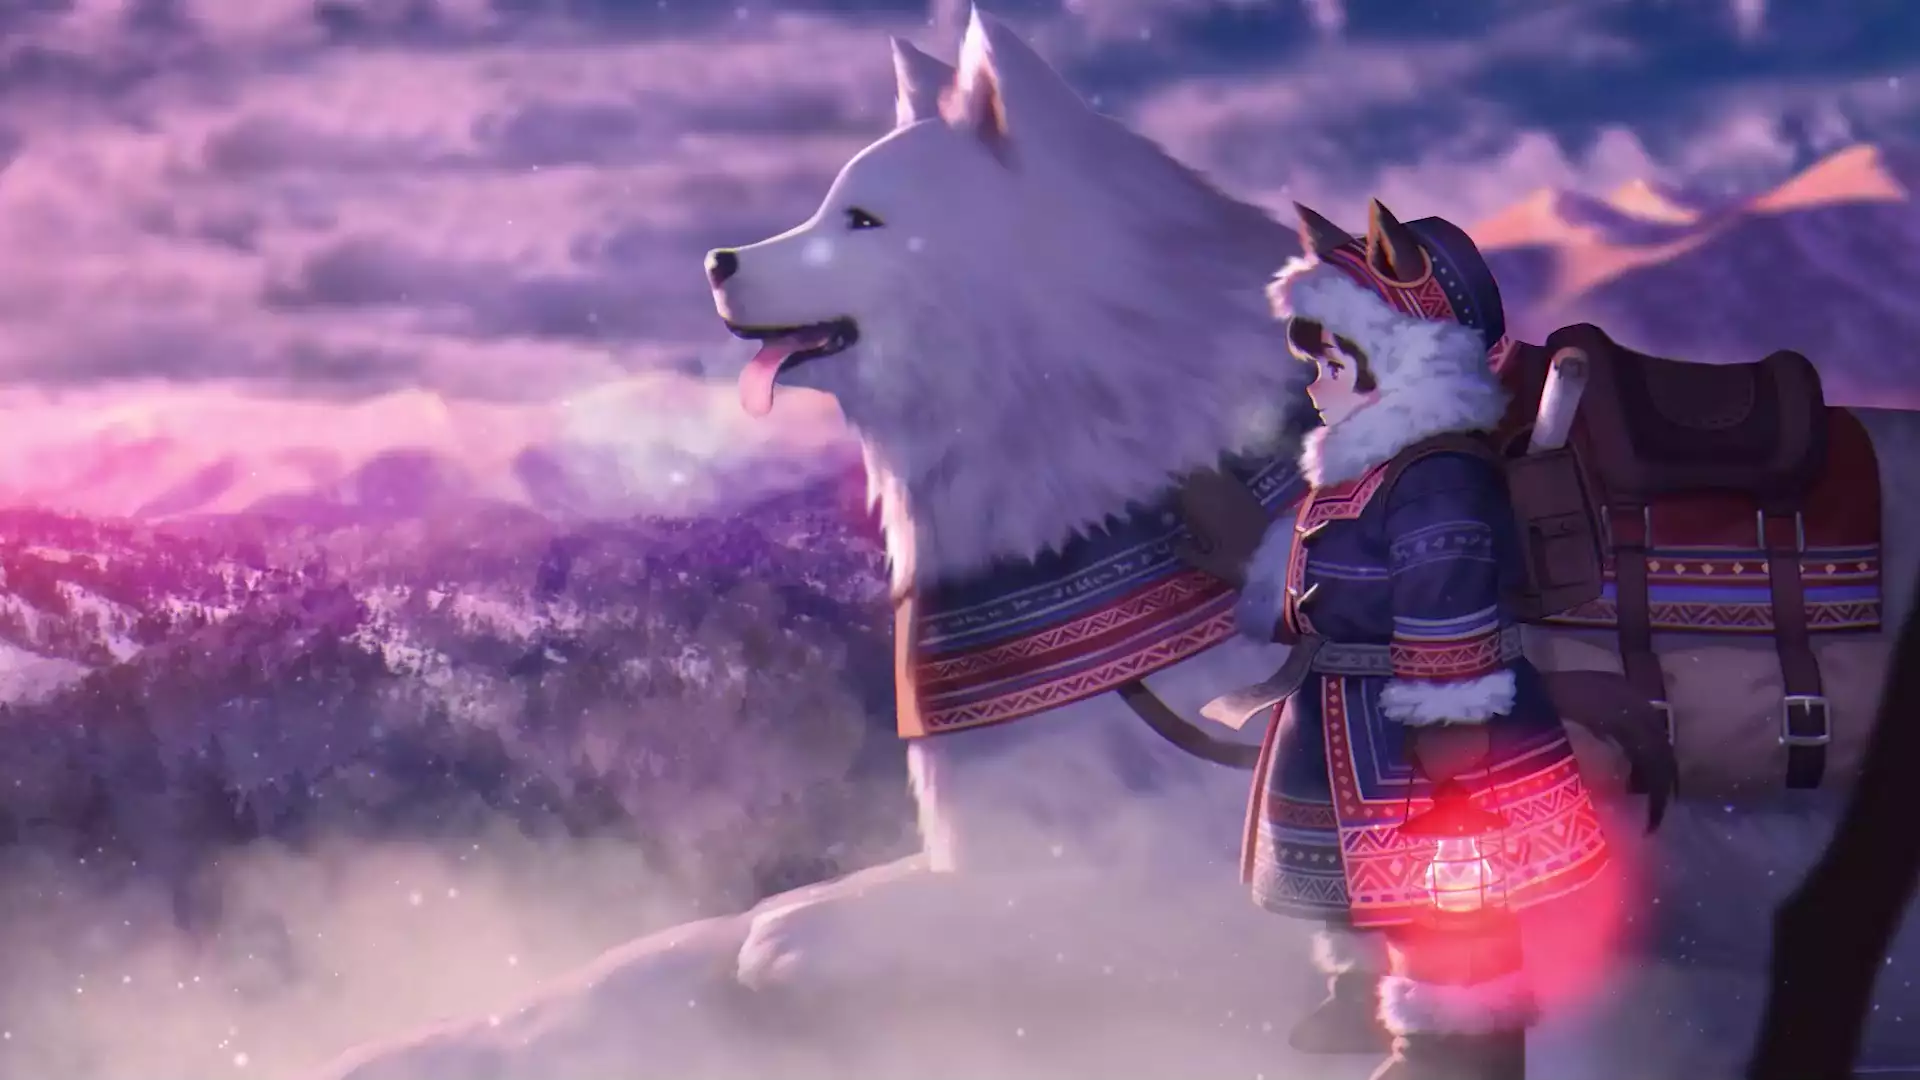 Live Wallpaper: evening, ears, winter, anime, animals, arts, dog, anime  girls - Rare Gallery HD Live Wallpapers